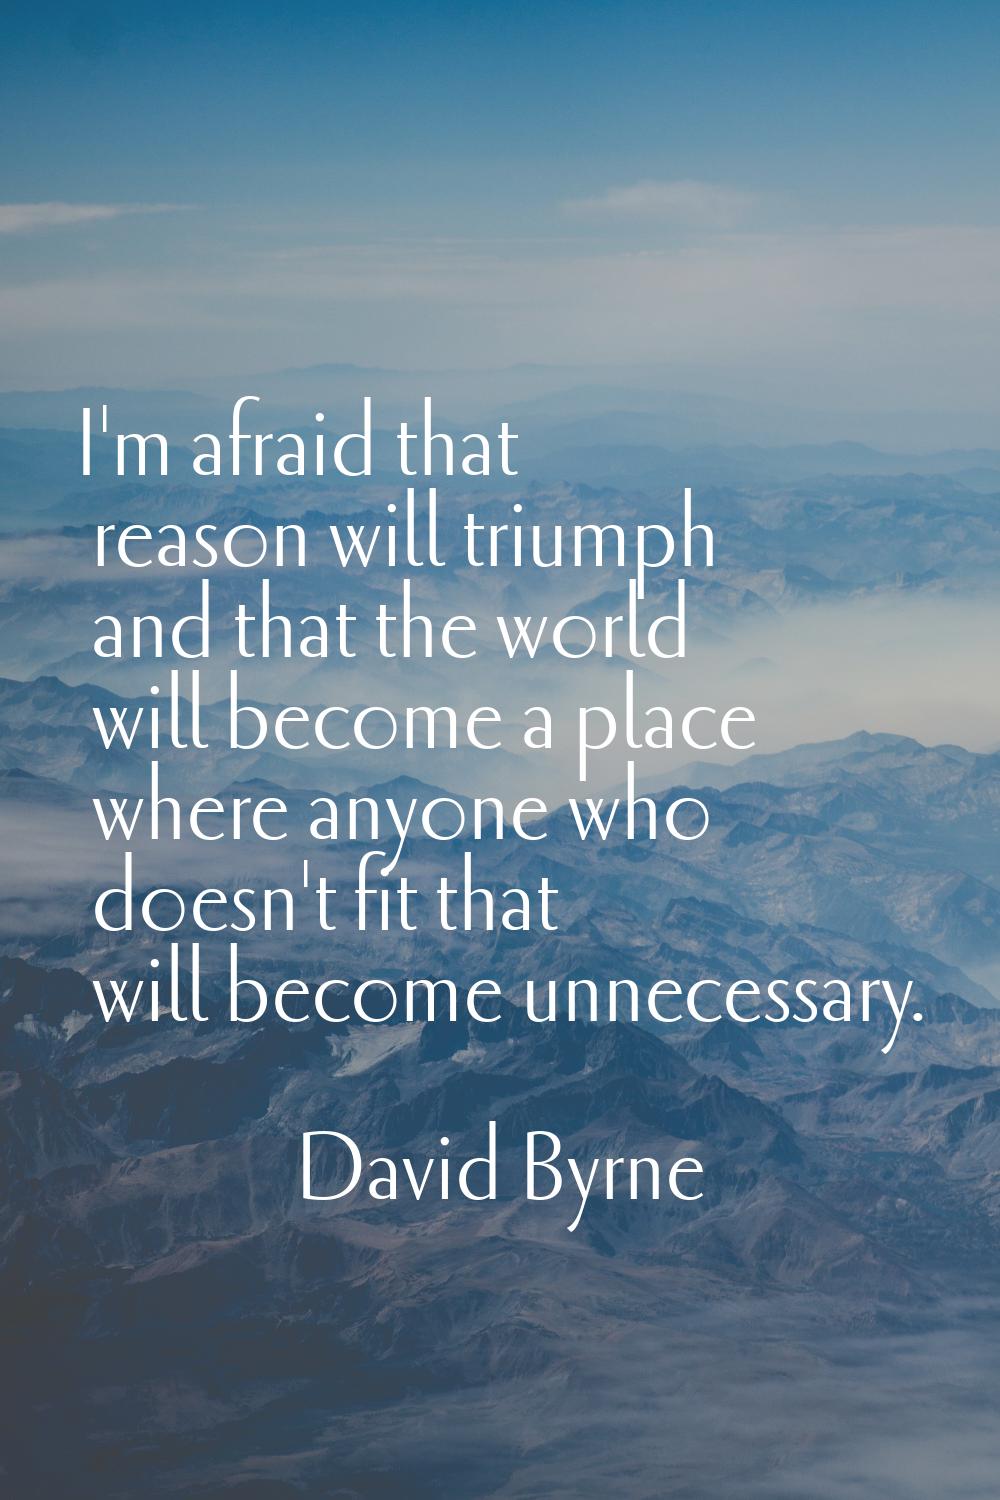 I'm afraid that reason will triumph and that the world will become a place where anyone who doesn't